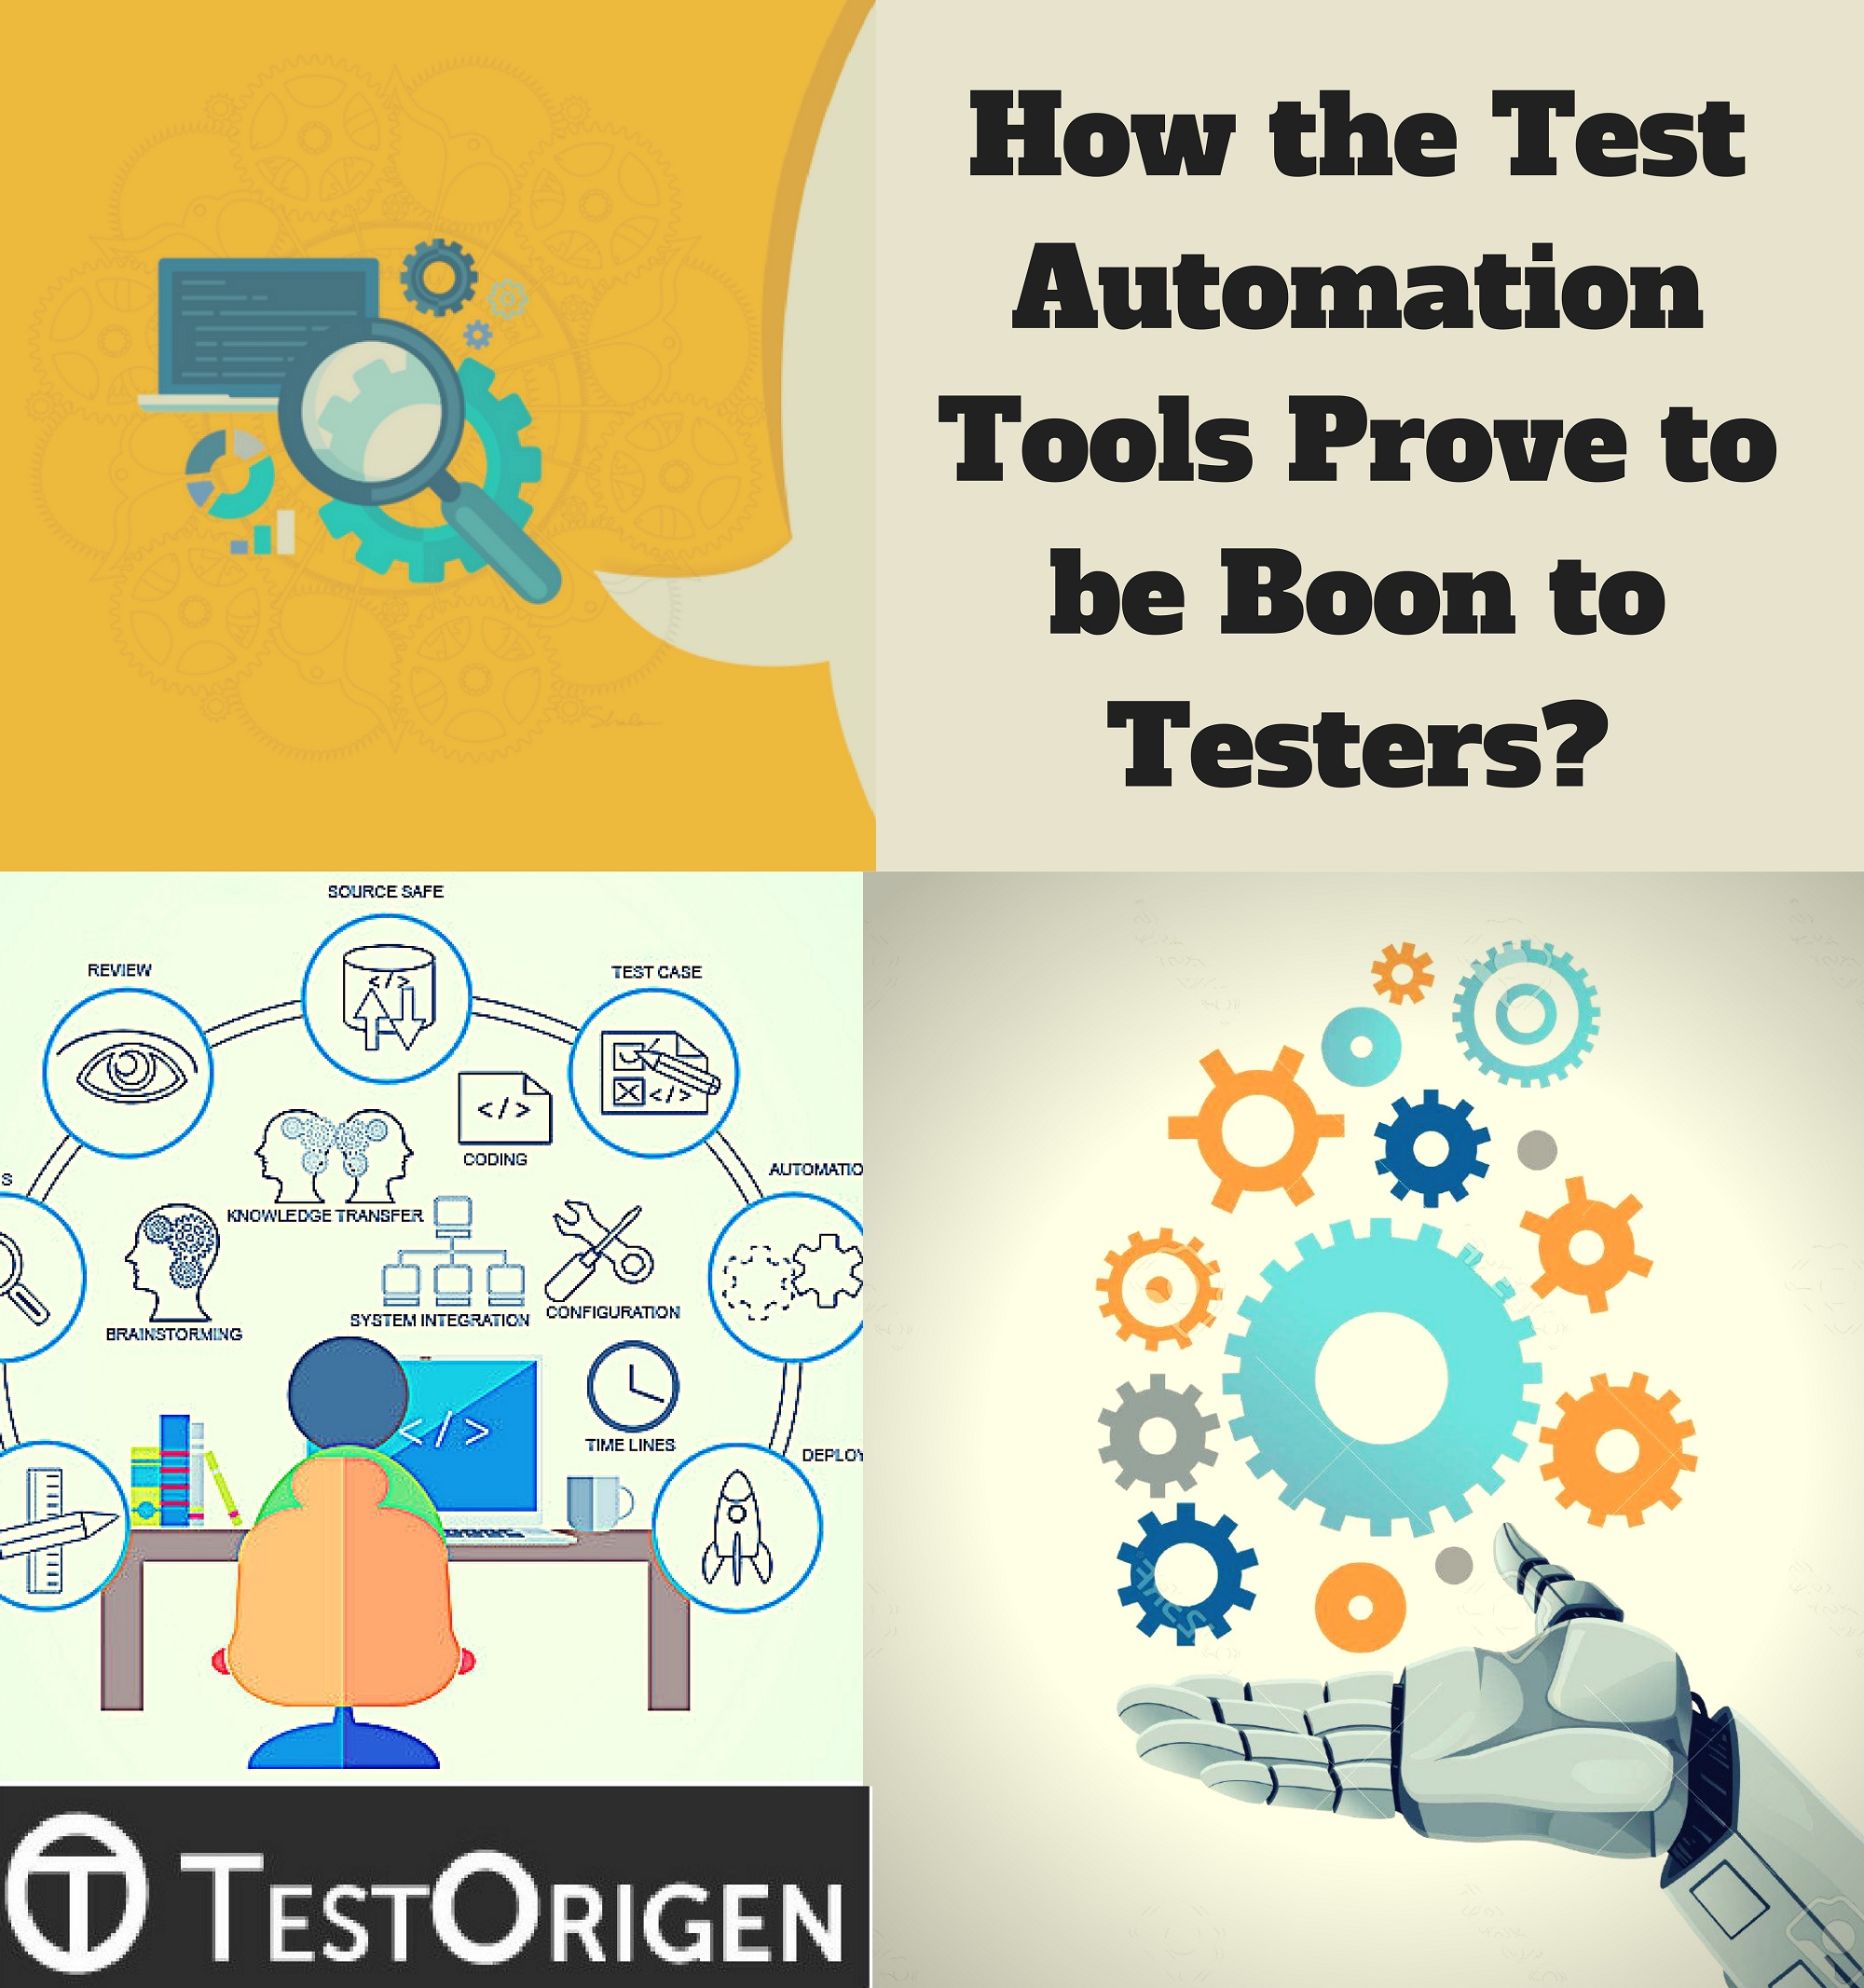 How the Test Automation Tools Prove to be Boon to Testers. open source test automation tools